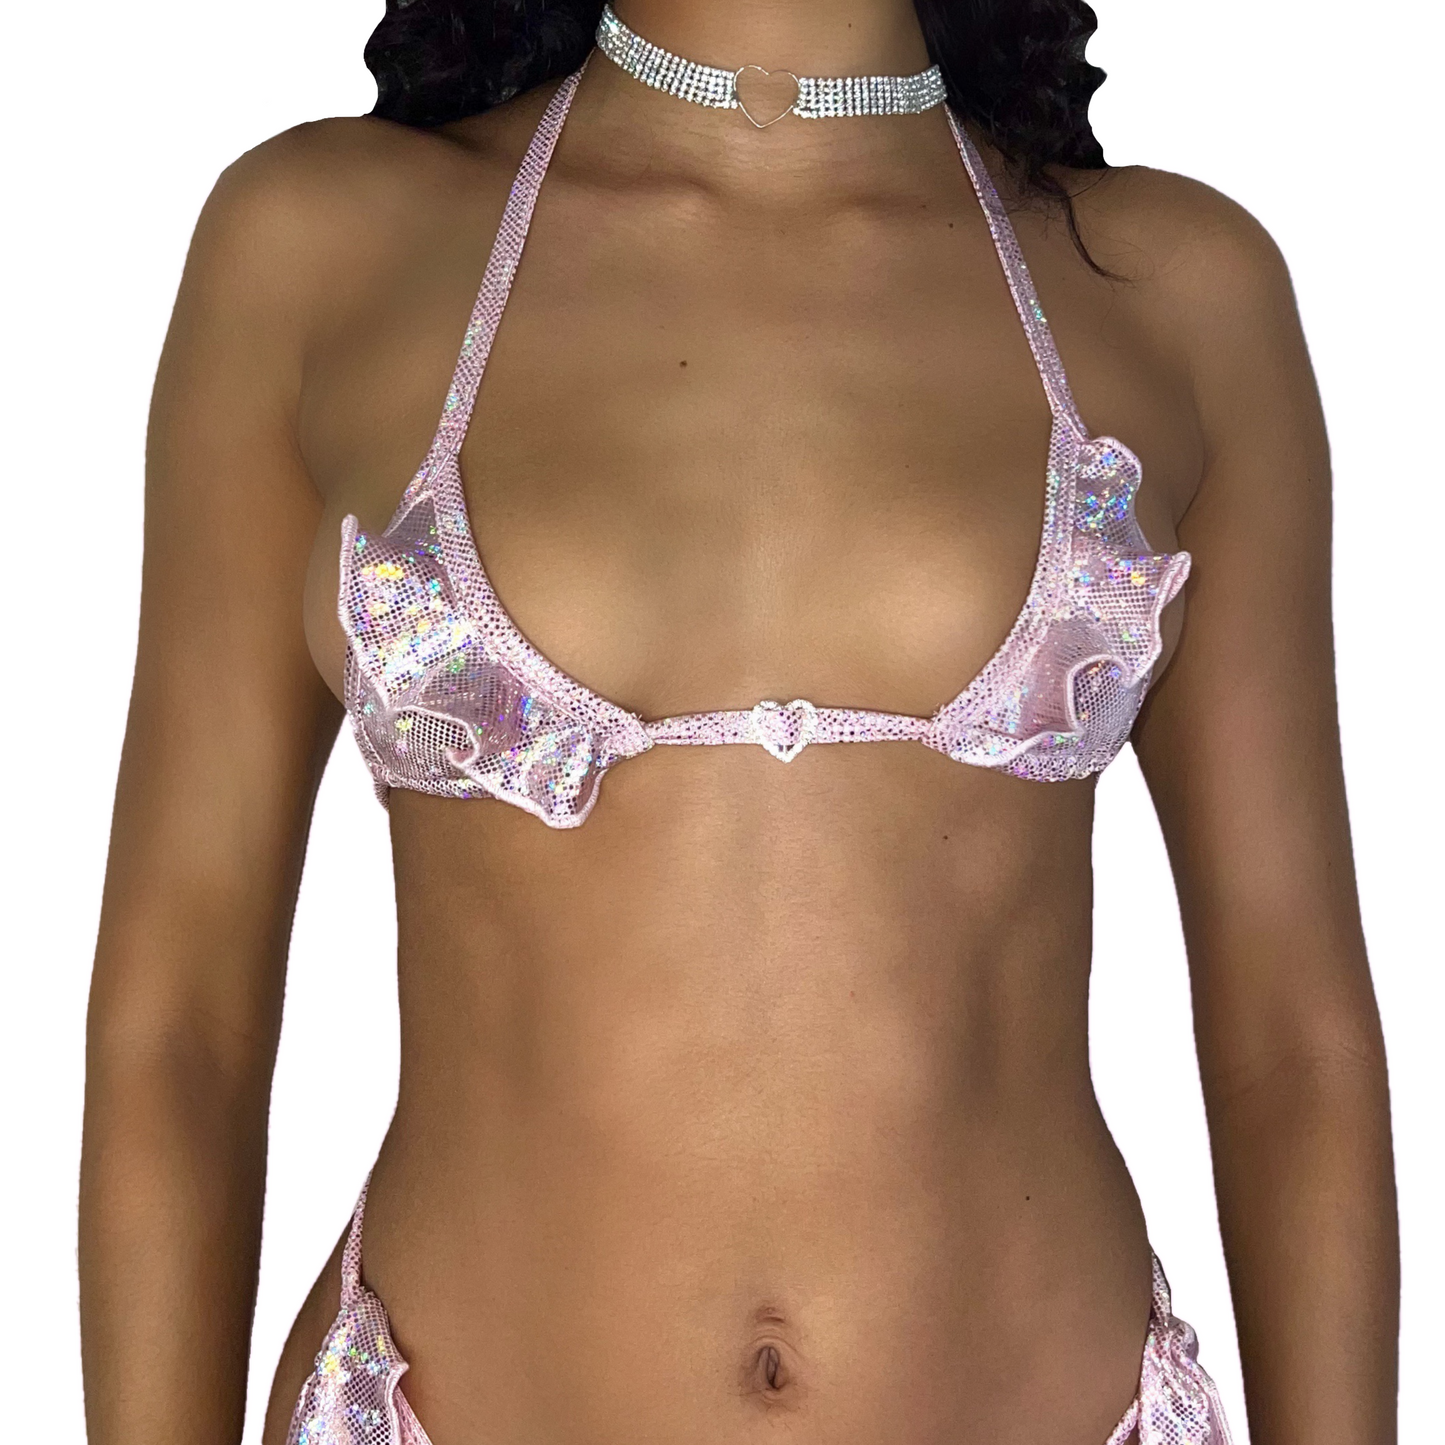 ACE Adore Charm Tri Top: Baby Pink Halo